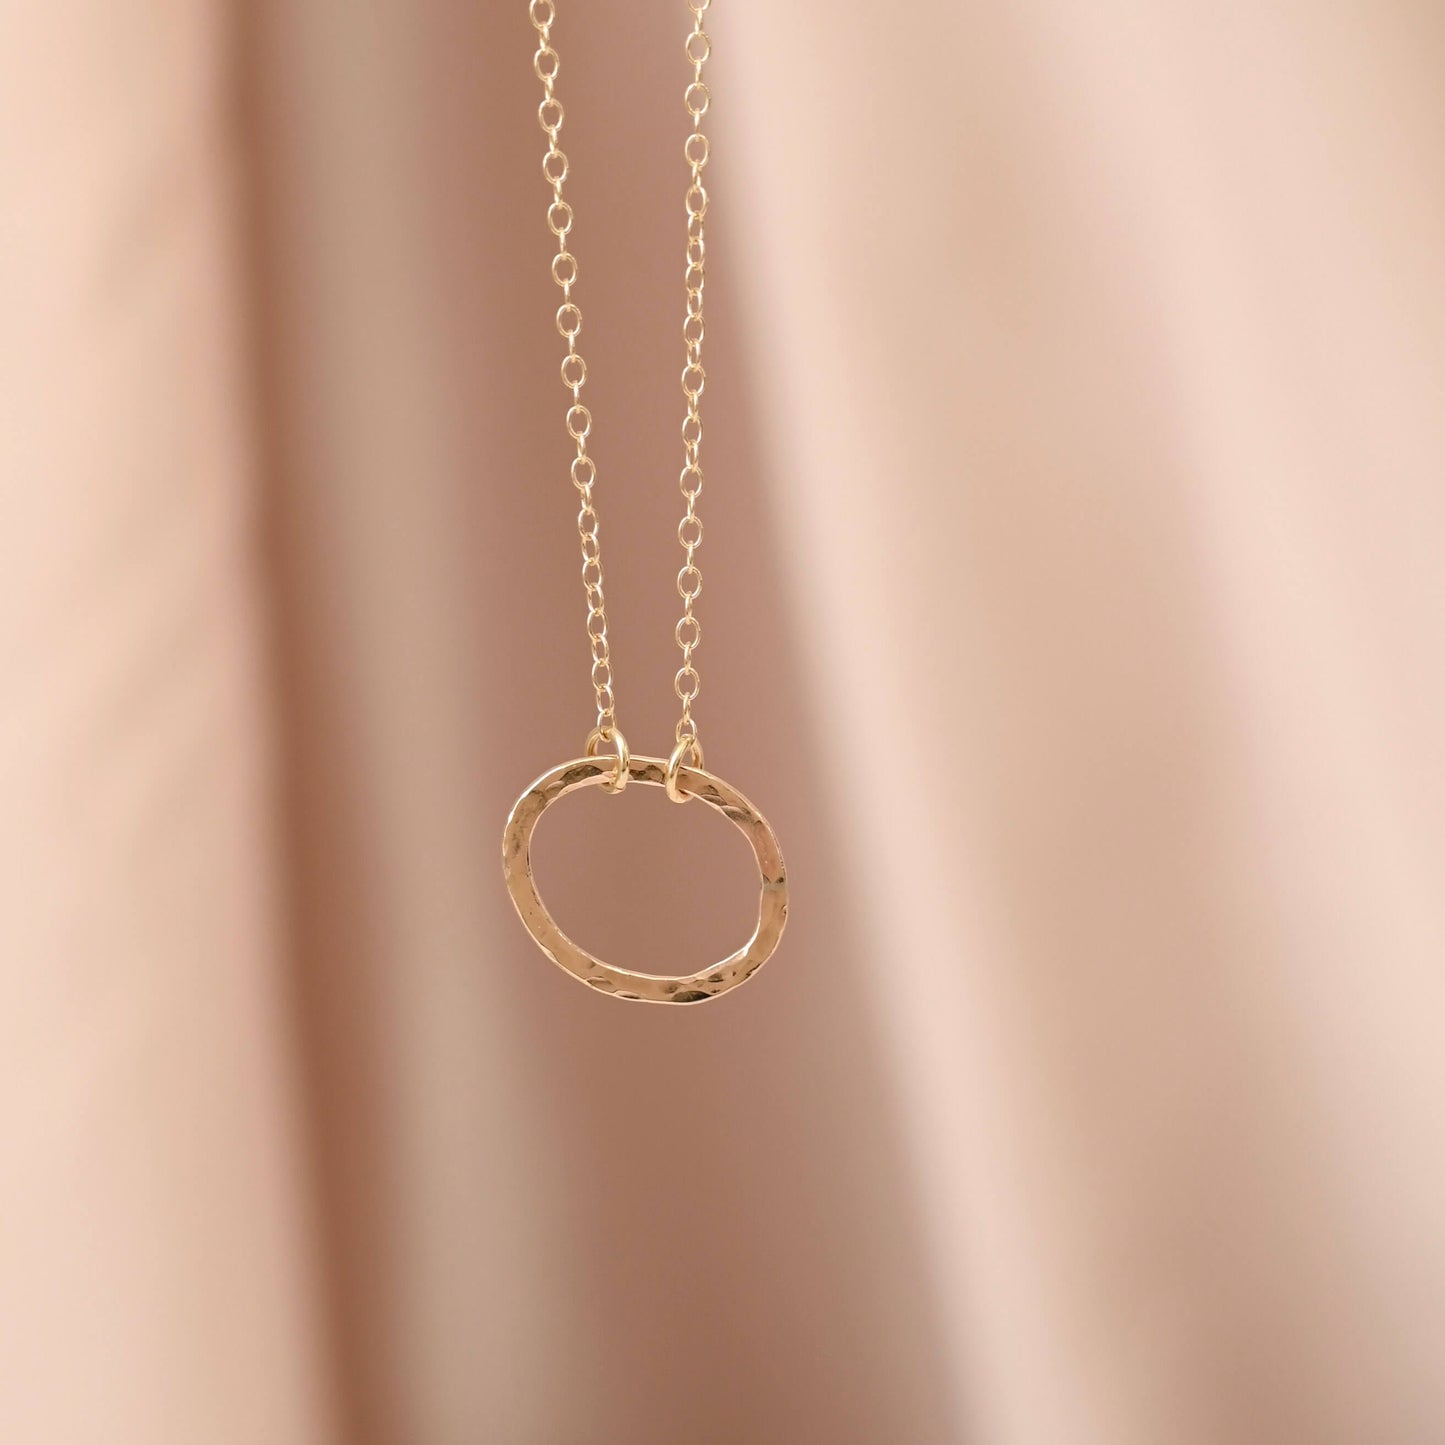 9ct Gold Hammered Oval Necklace